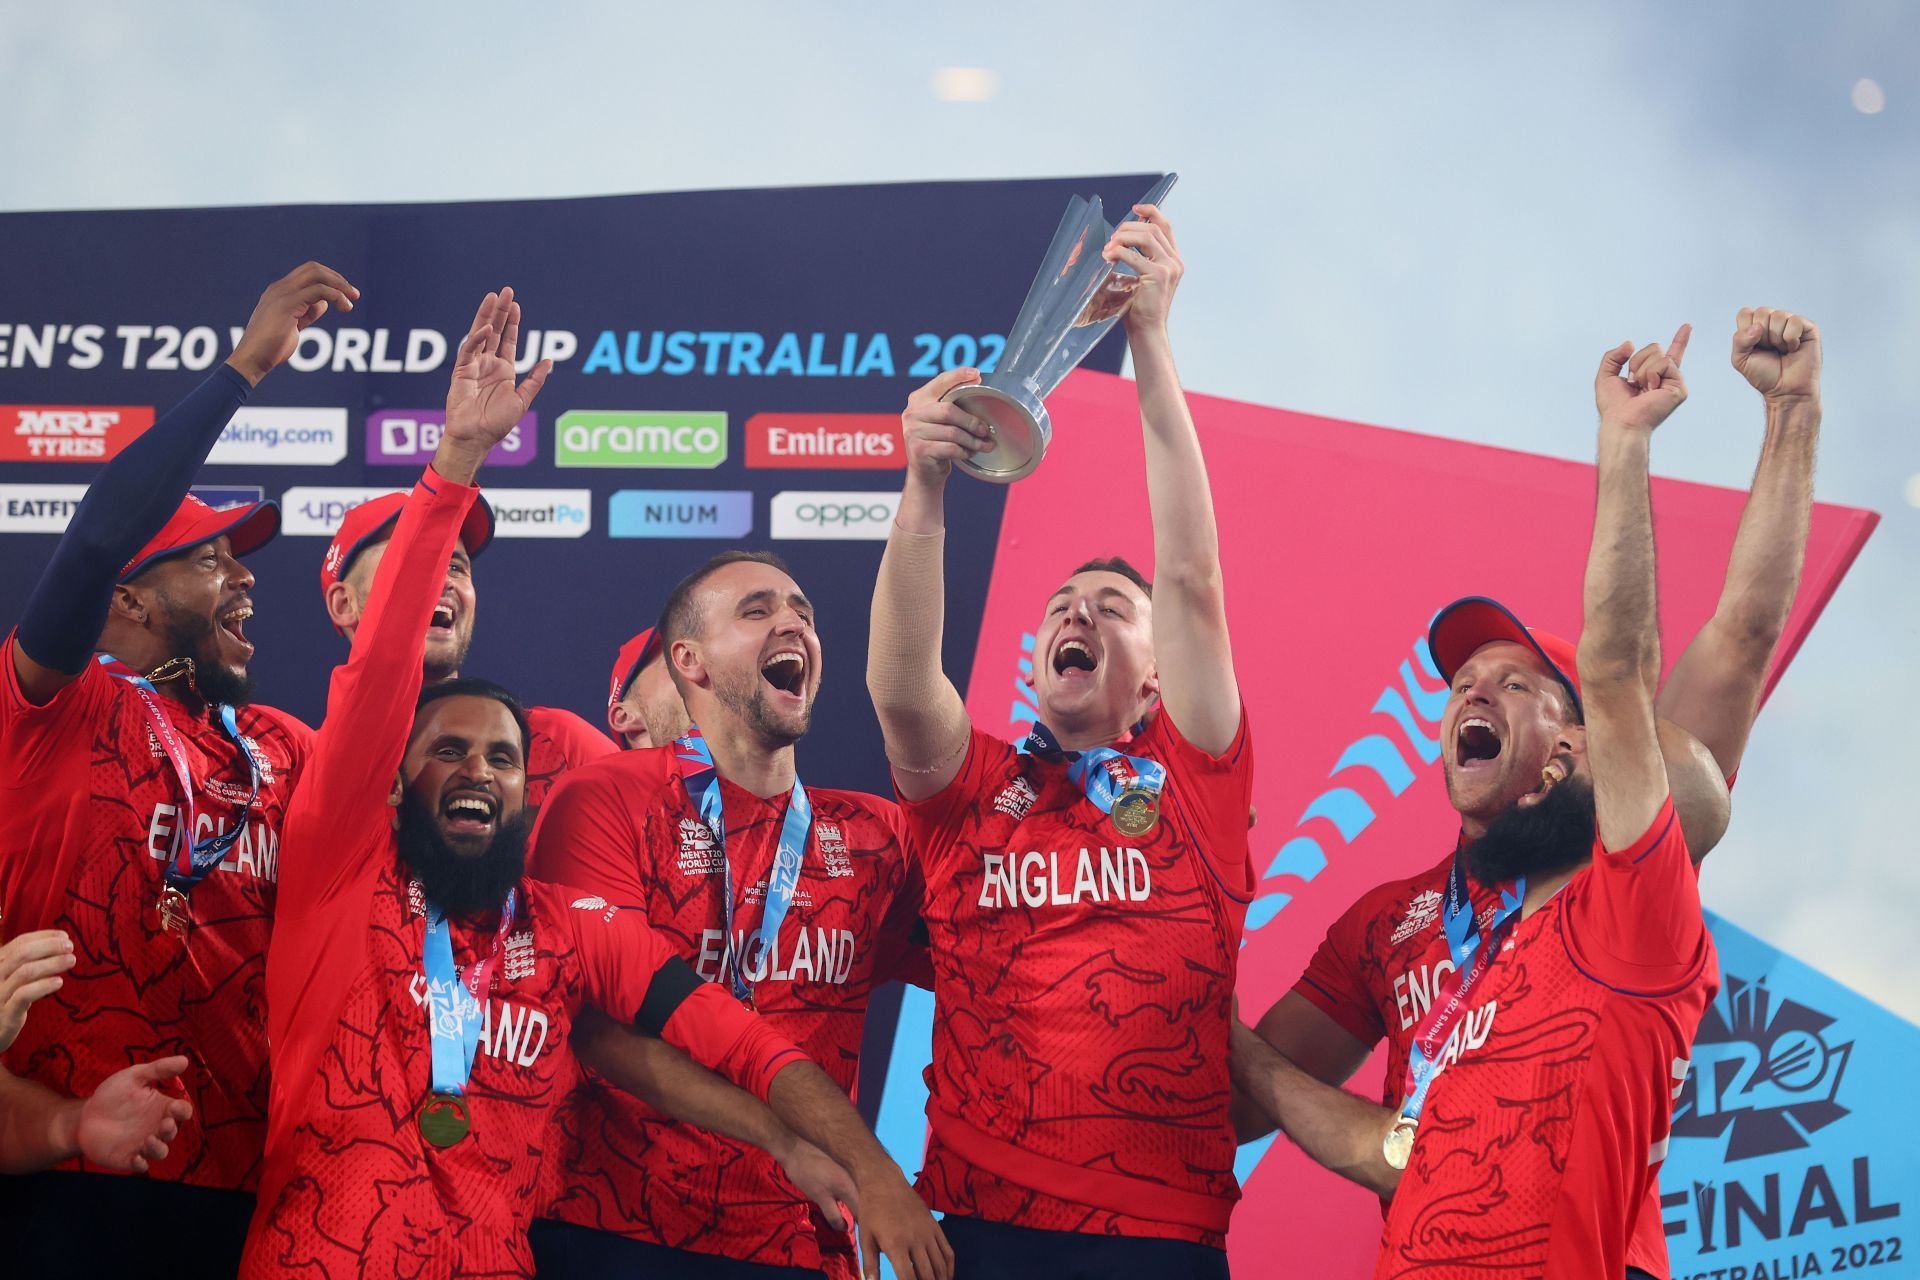 England celebrating their T20 World Cup win. (Credits: Getty)